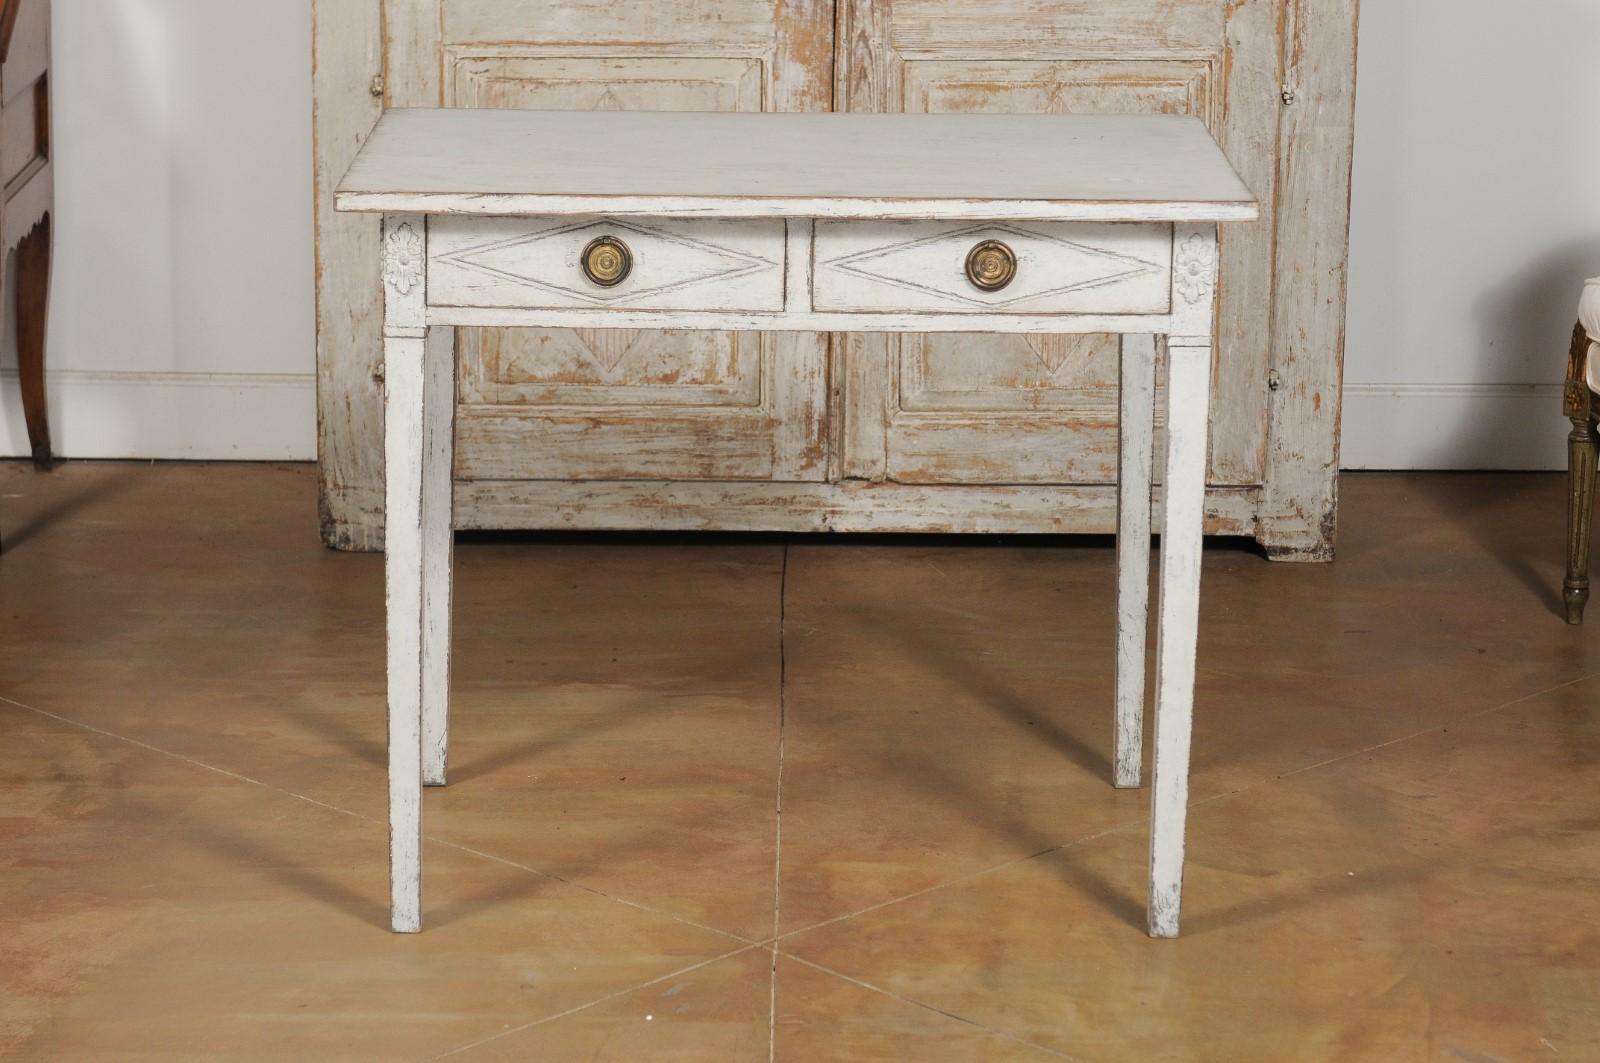 Swedish Gustavian Style Painted Wood Desk with Two Drawers and Diamond Motifs 13